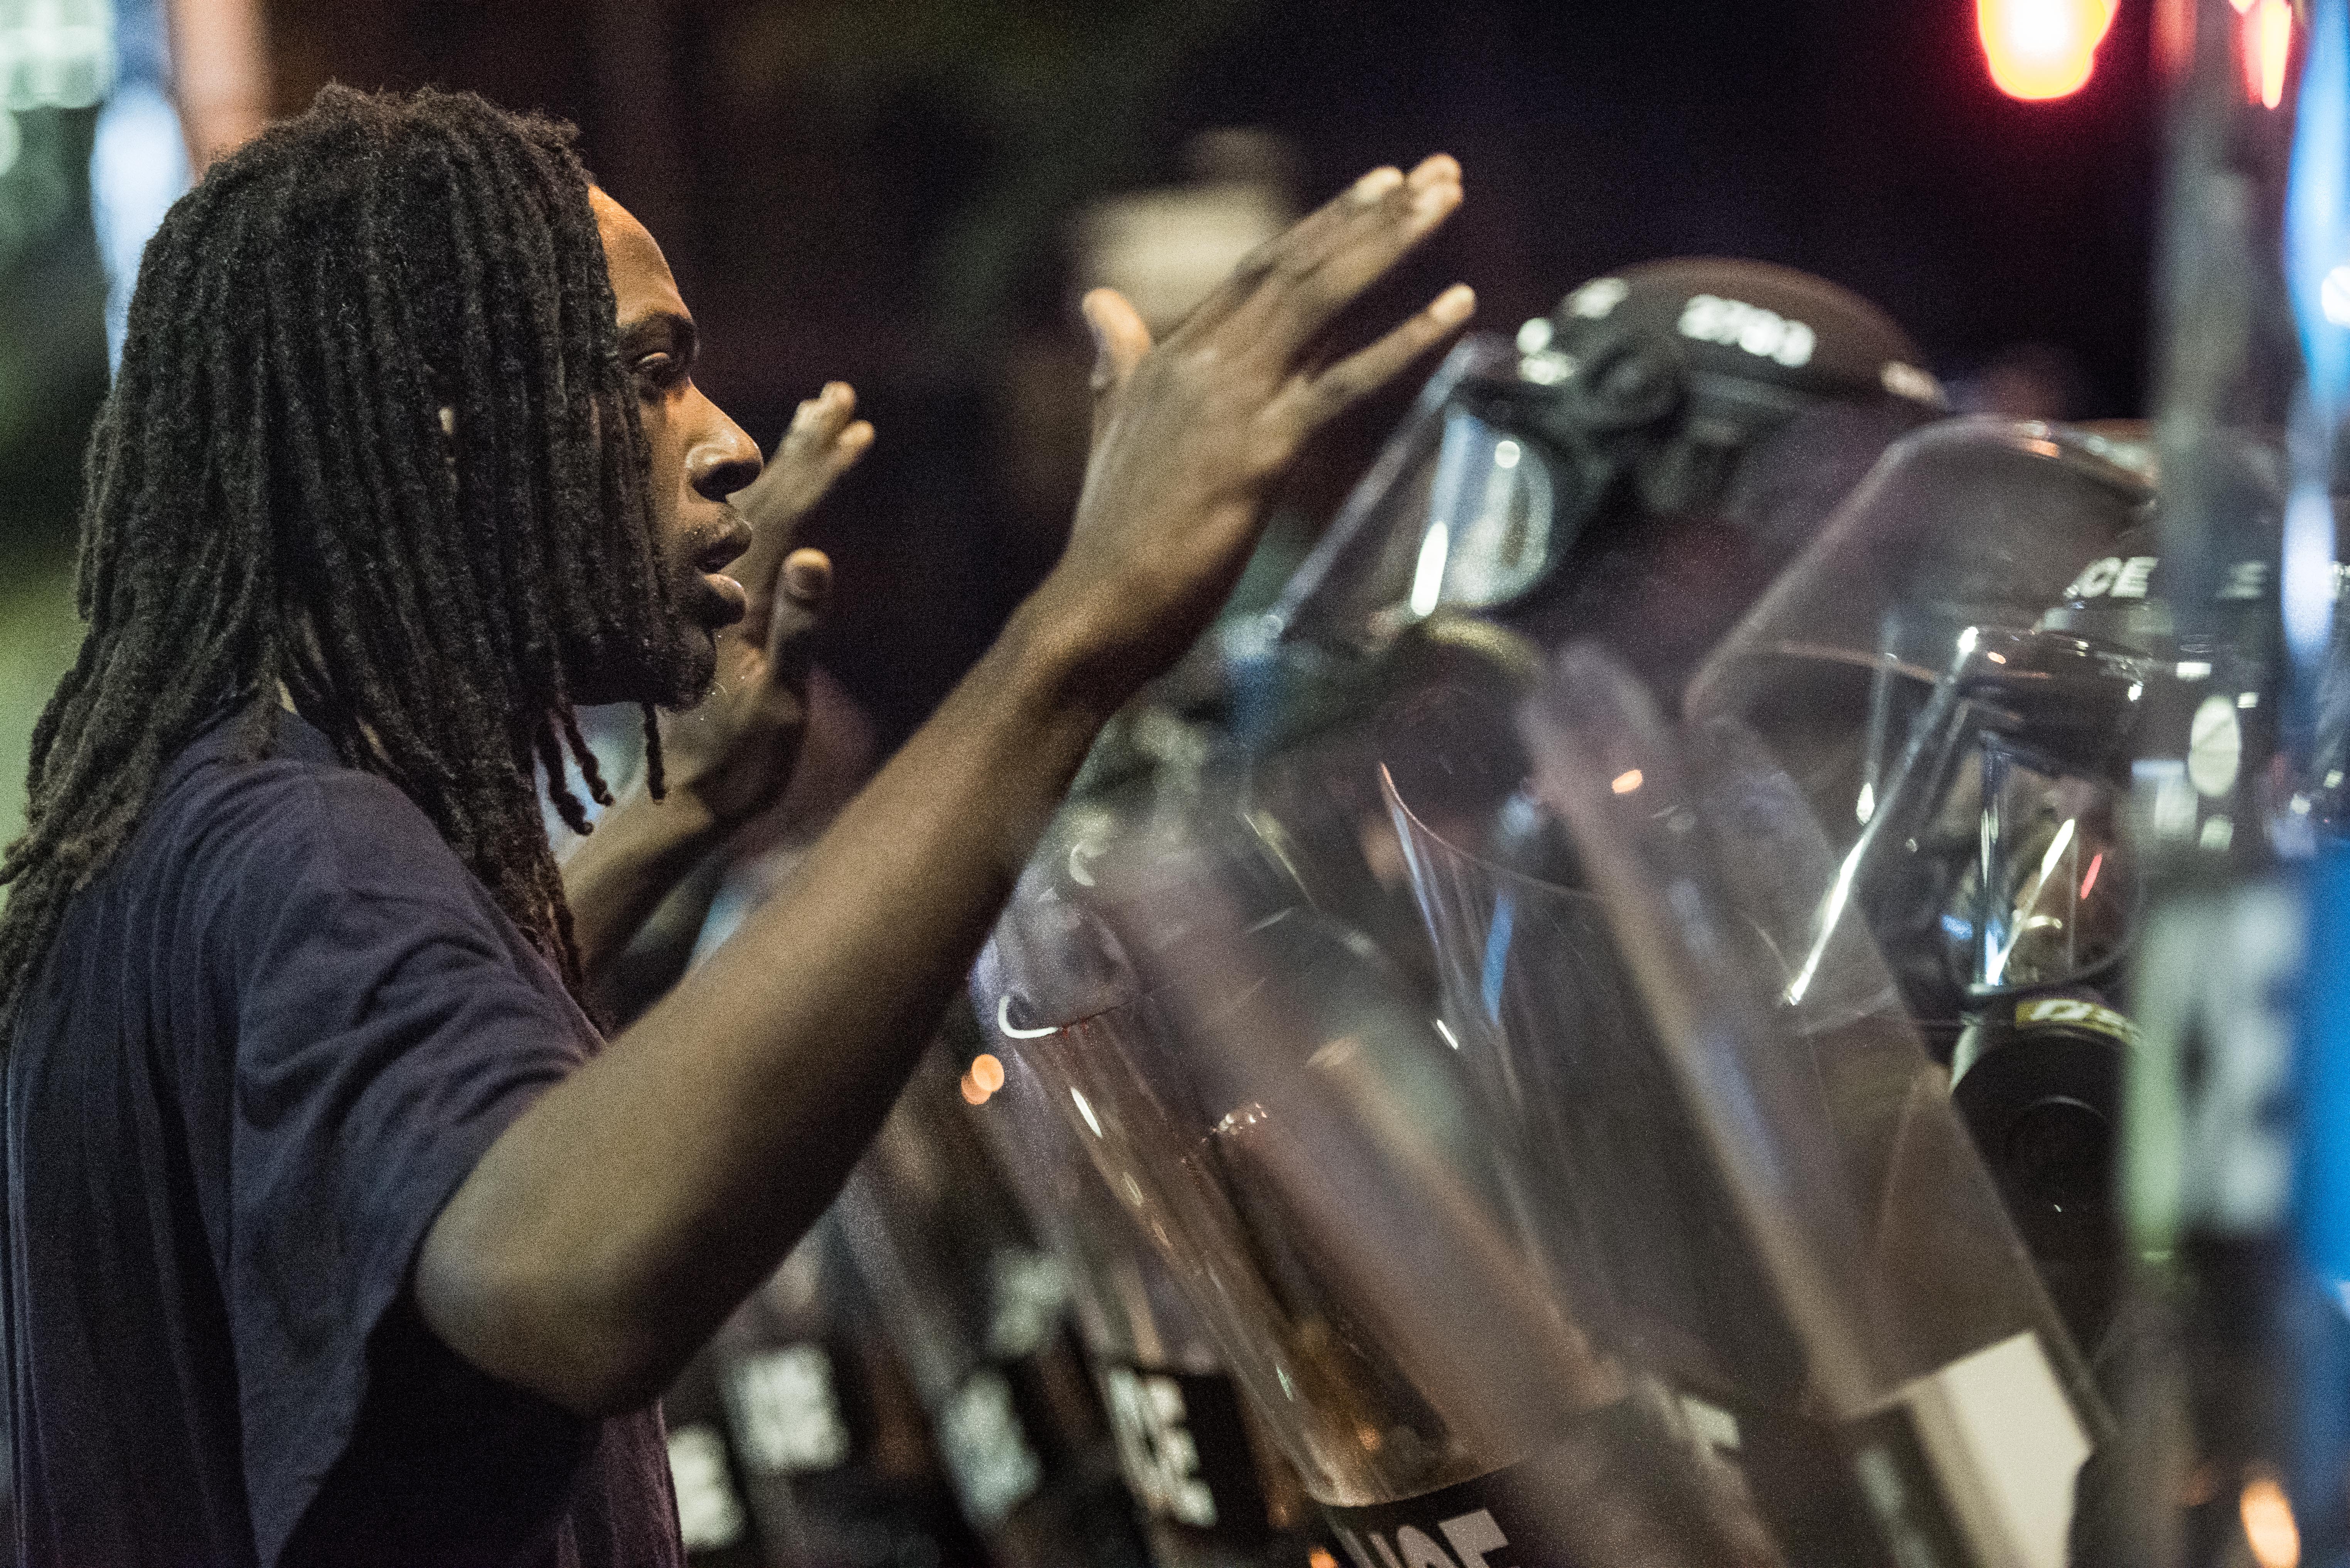 36 Of The Most Powerful, Harrowing And Inspiring Protest Photos From 2016
